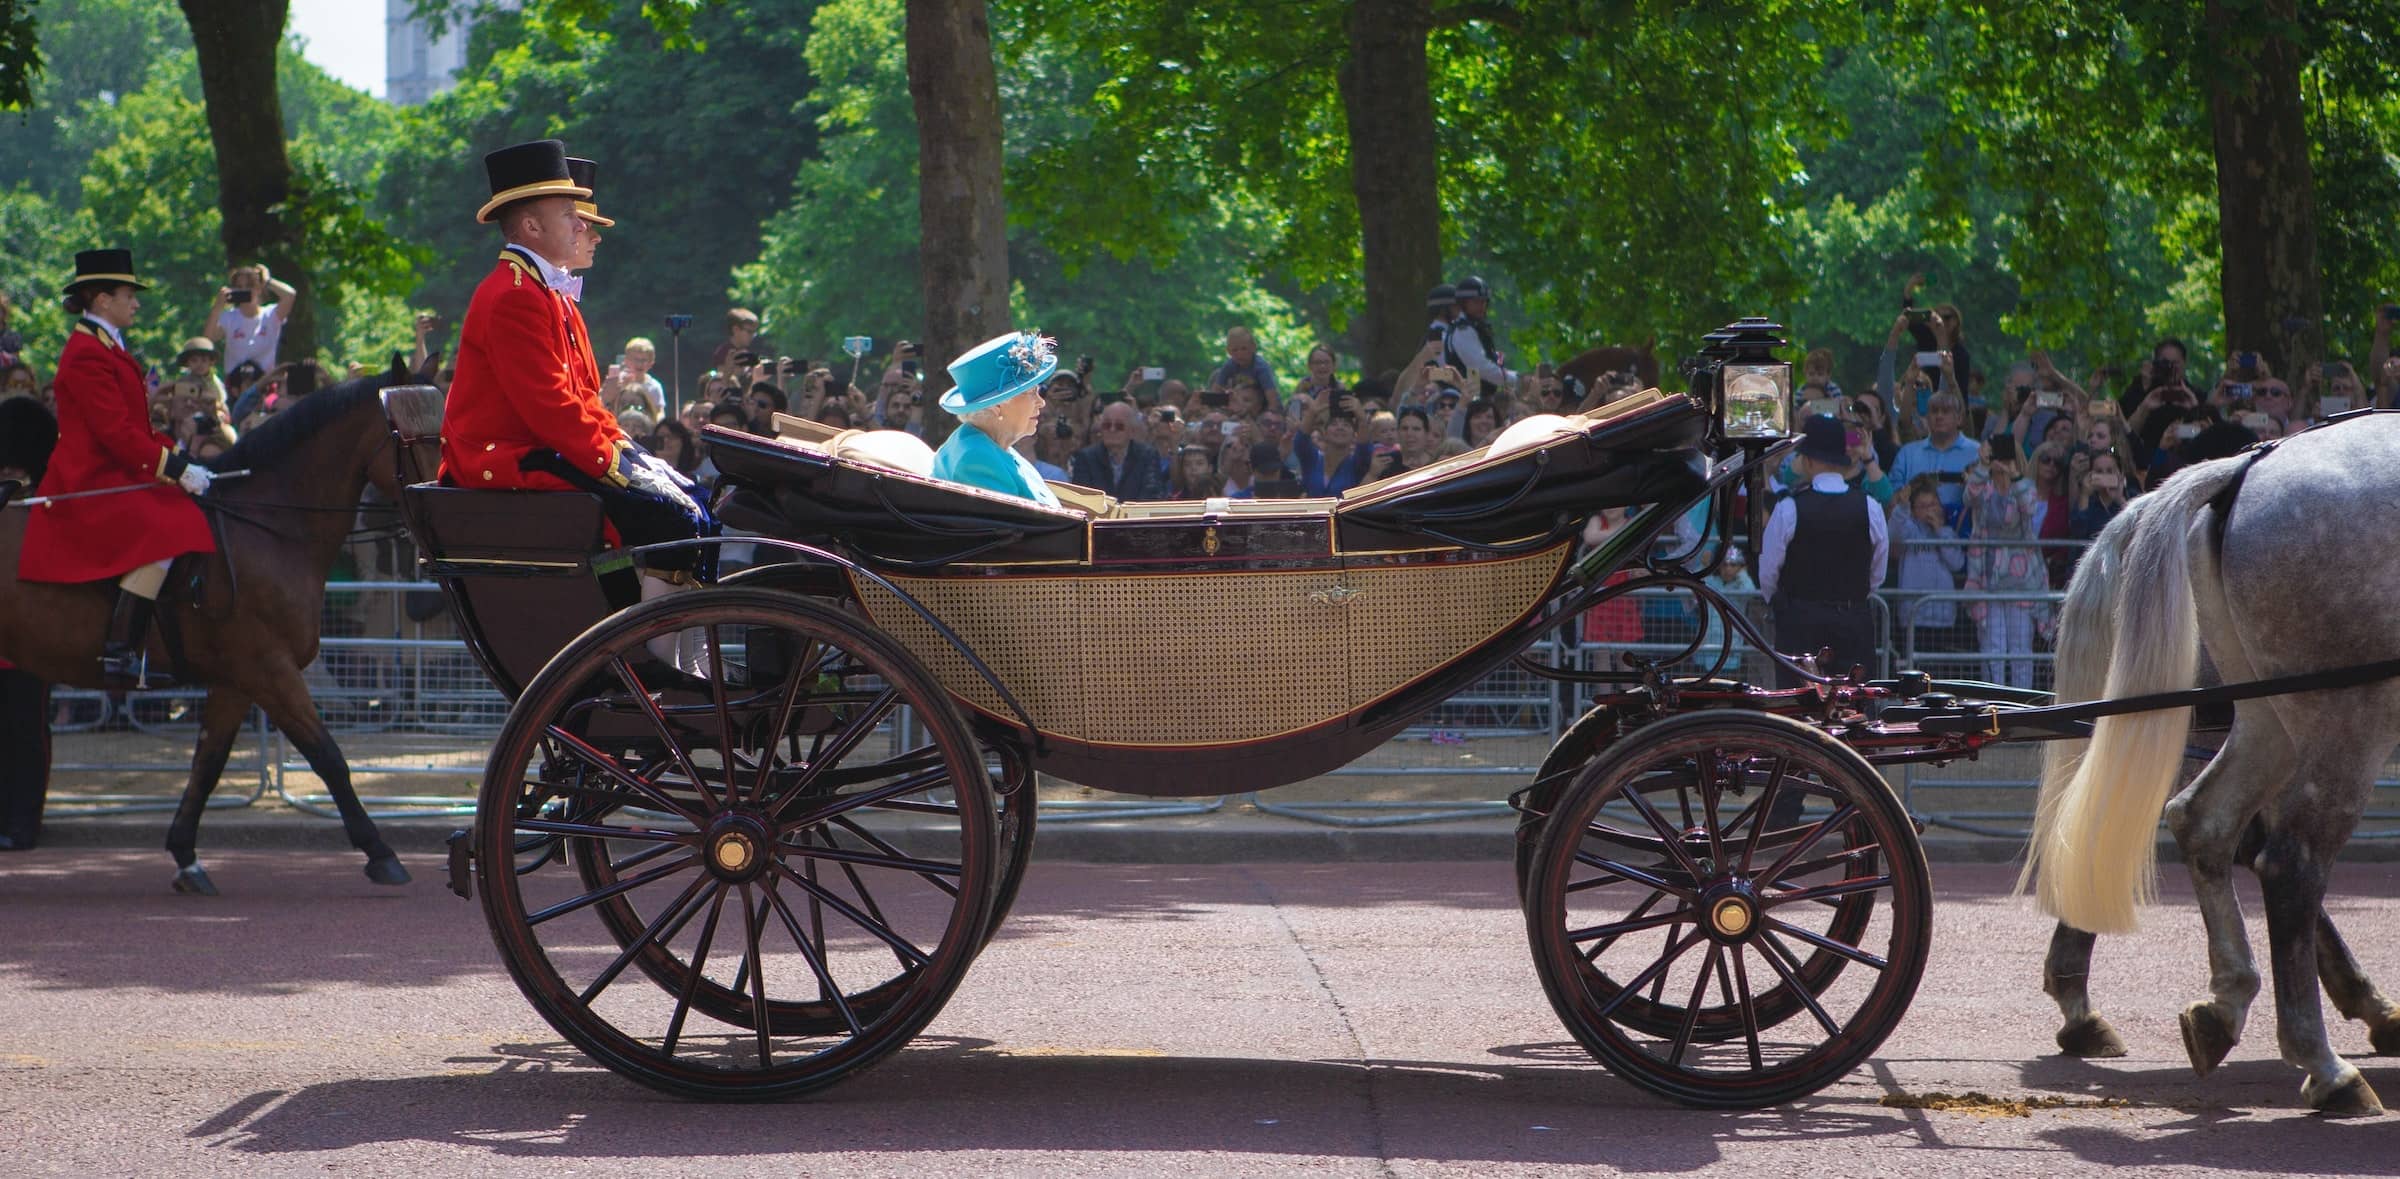 The queen travels in horse drawn carriage